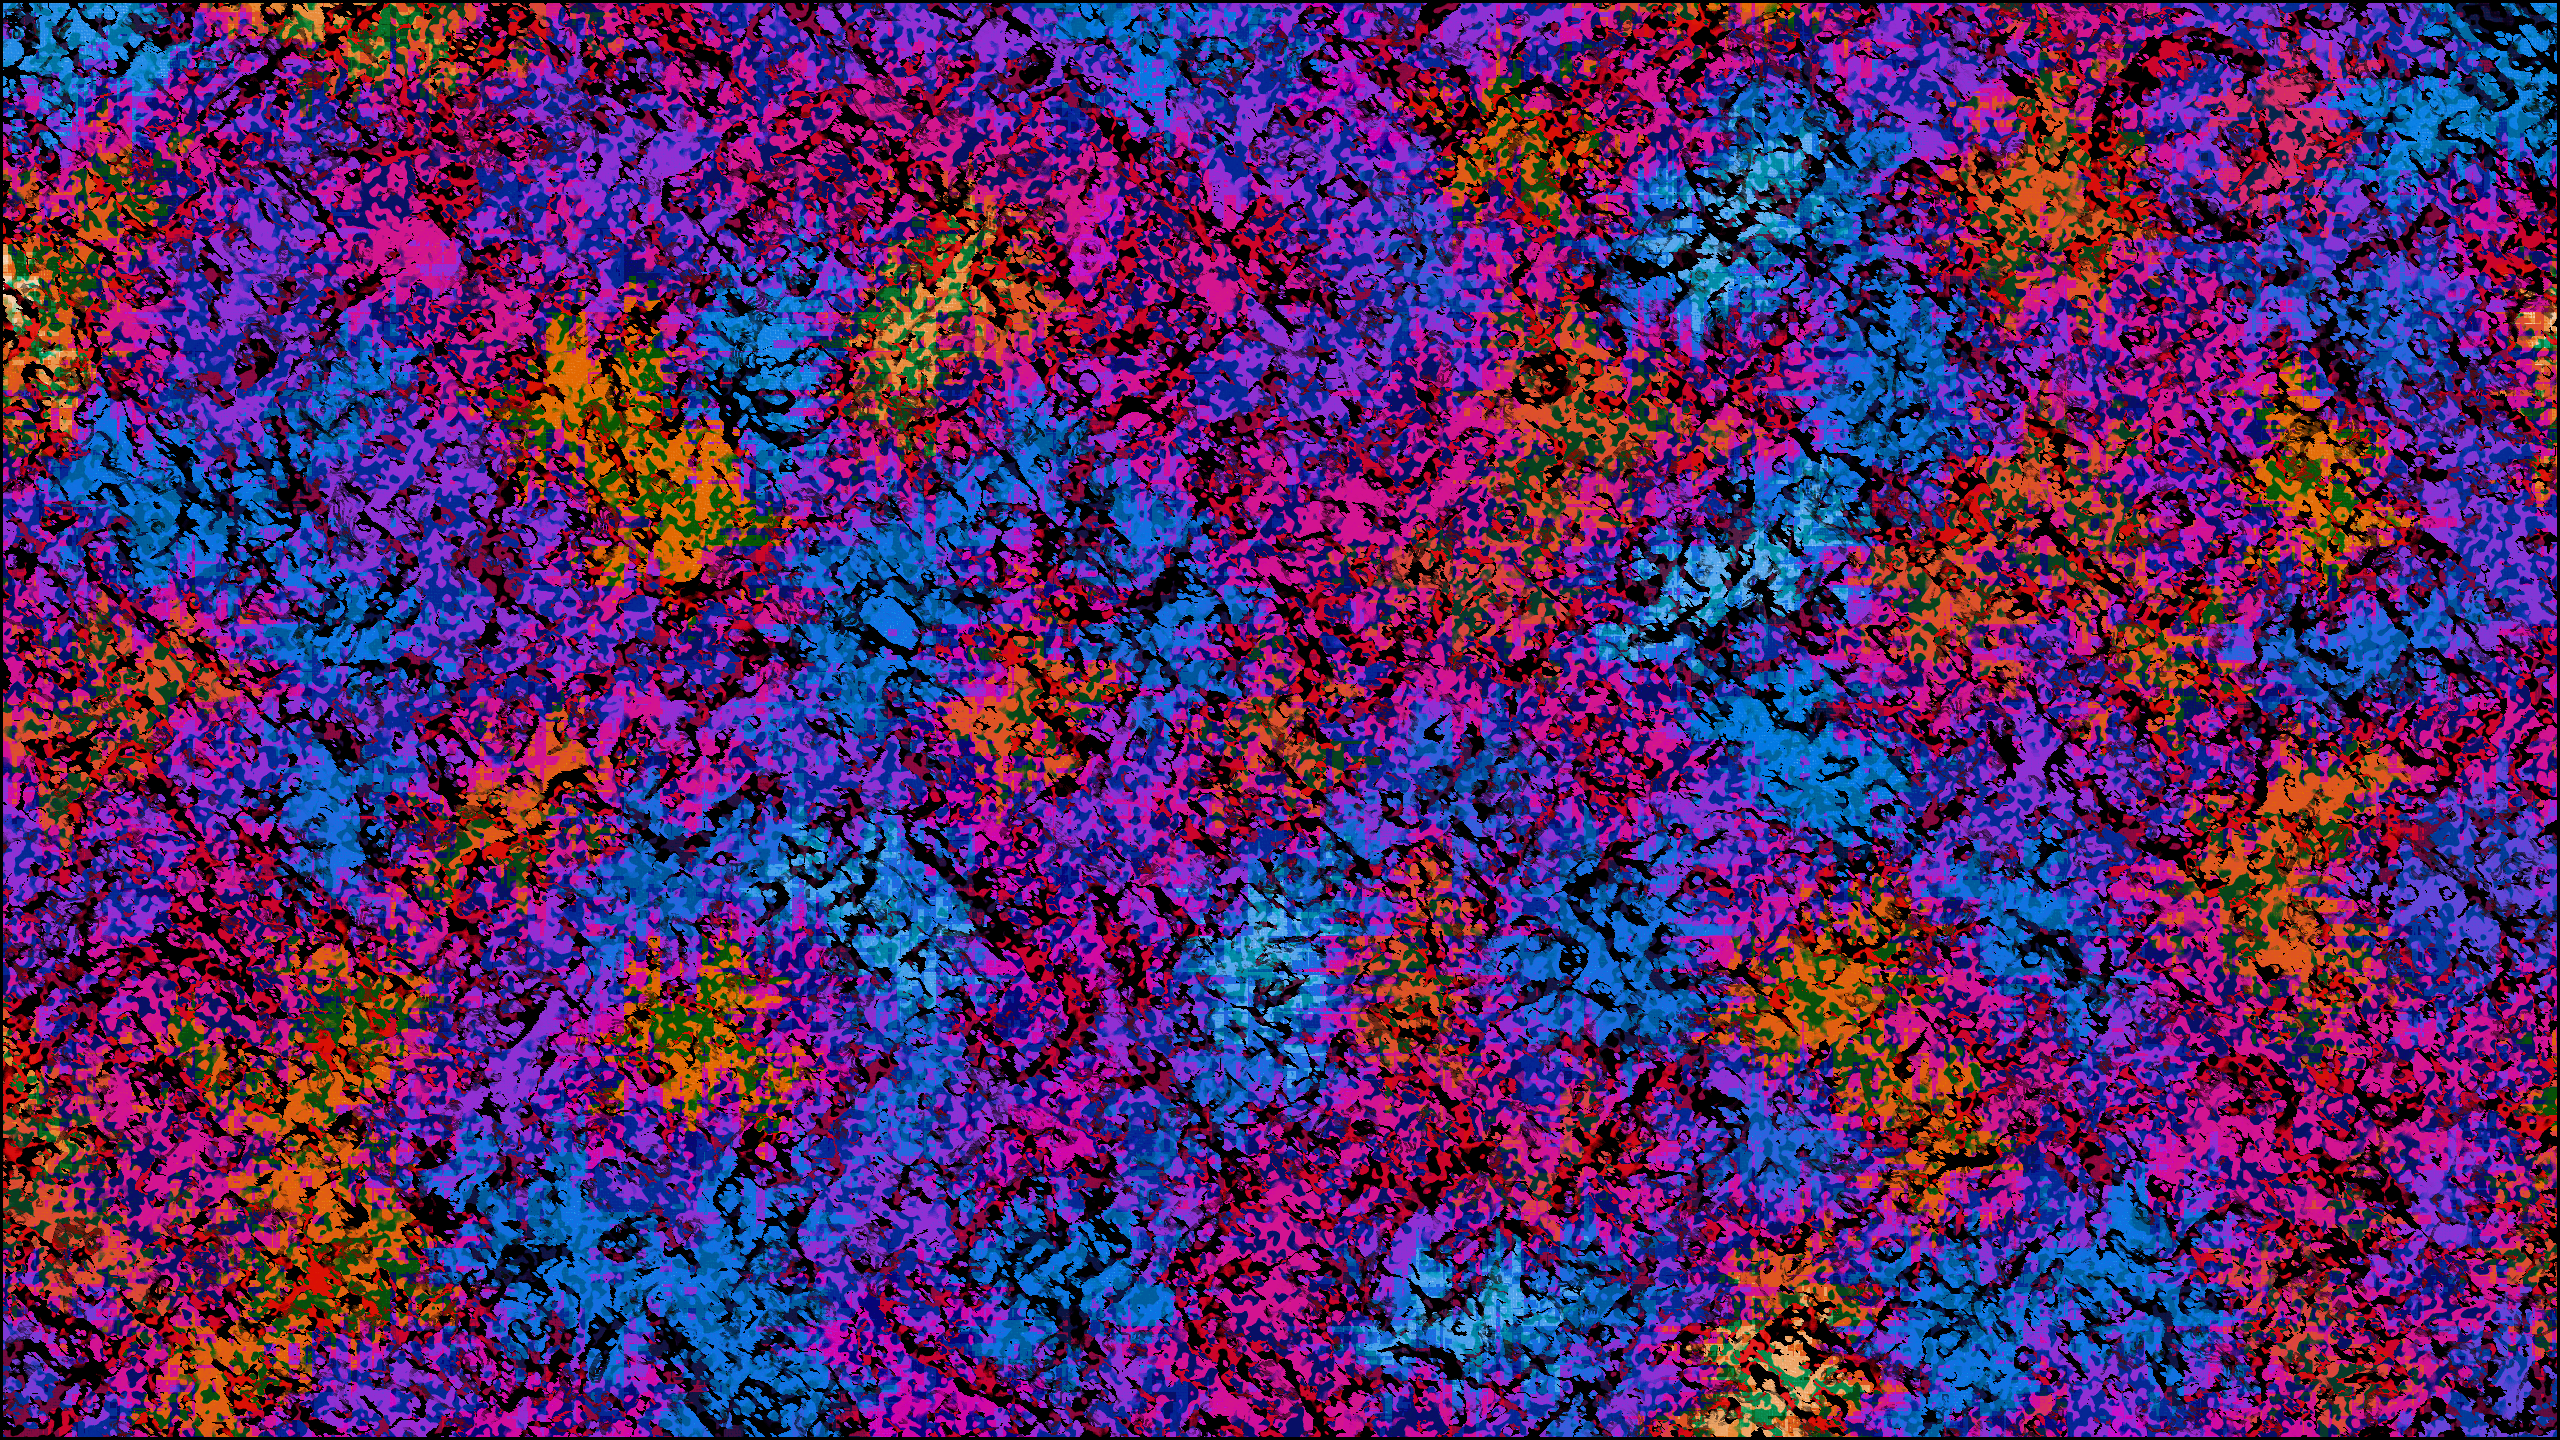 Abstract Digital Art Trippy Psychedelic Brightness 2560x1440